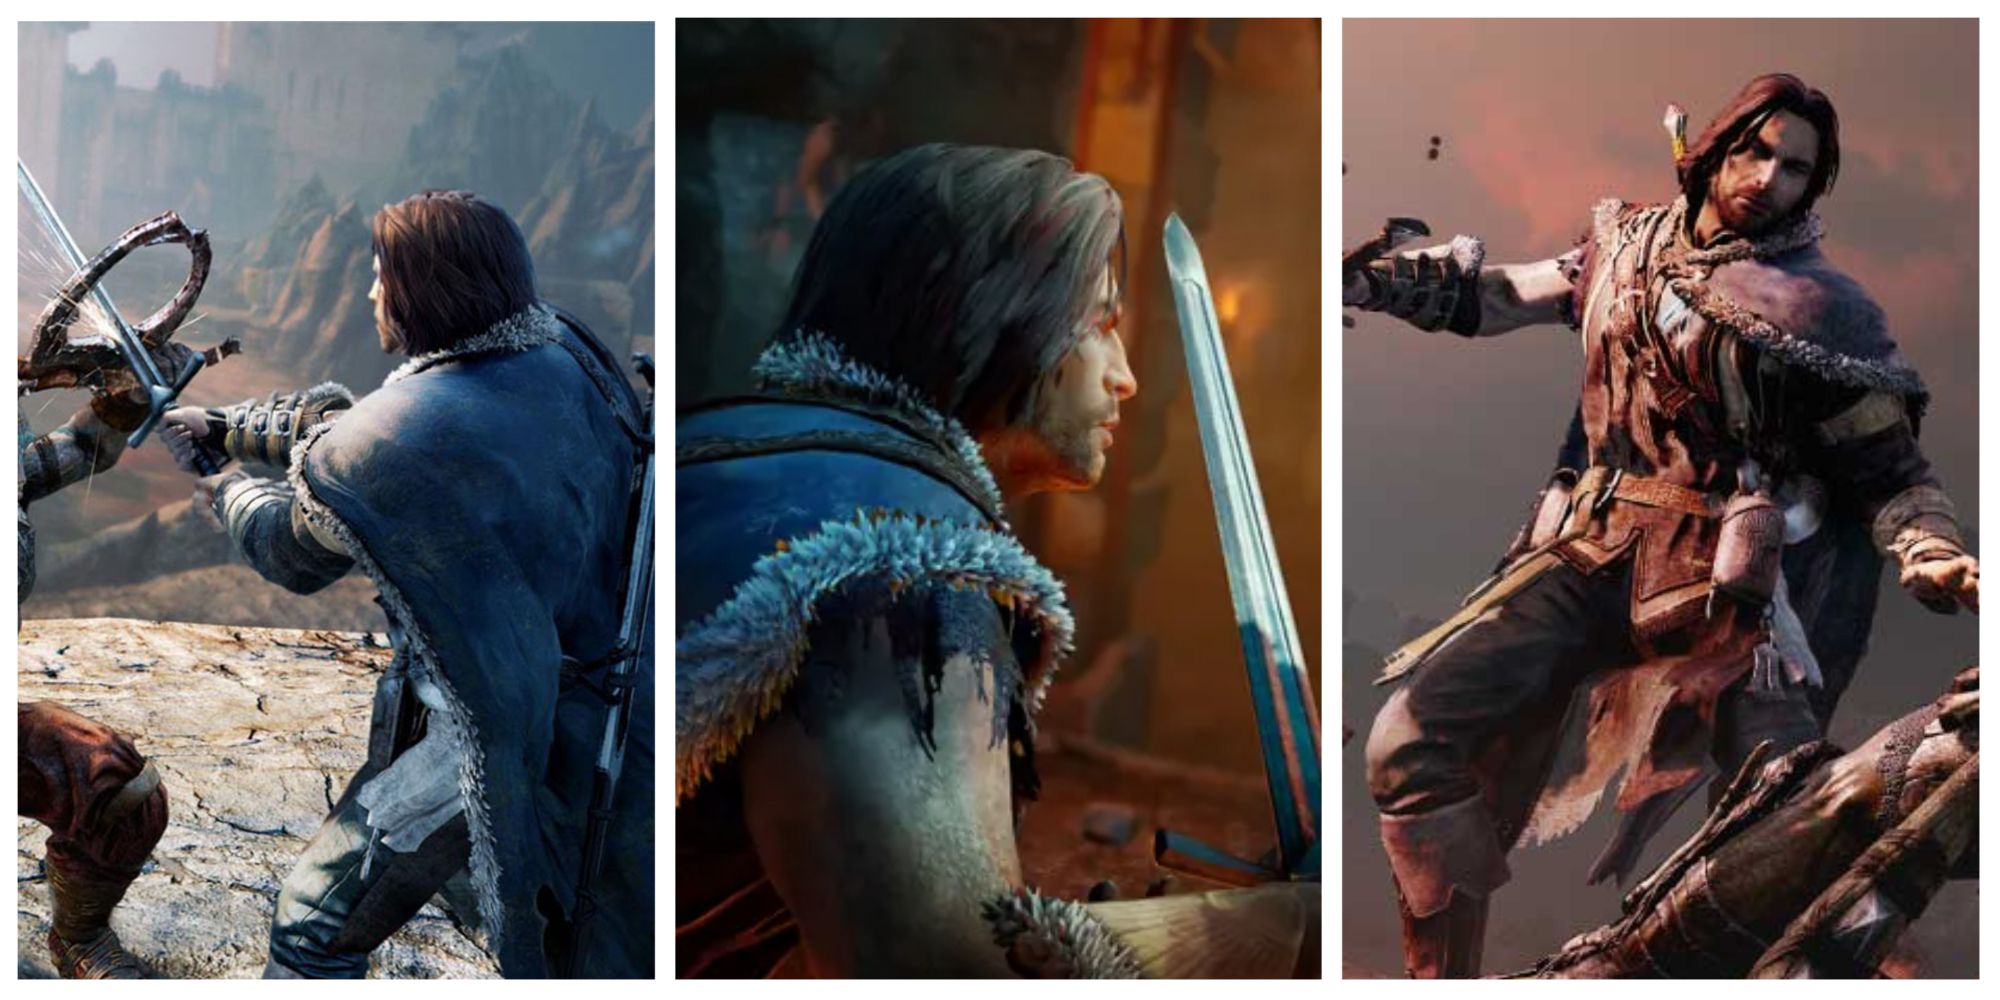 talion fighting in middle-earth: shadow of mordor